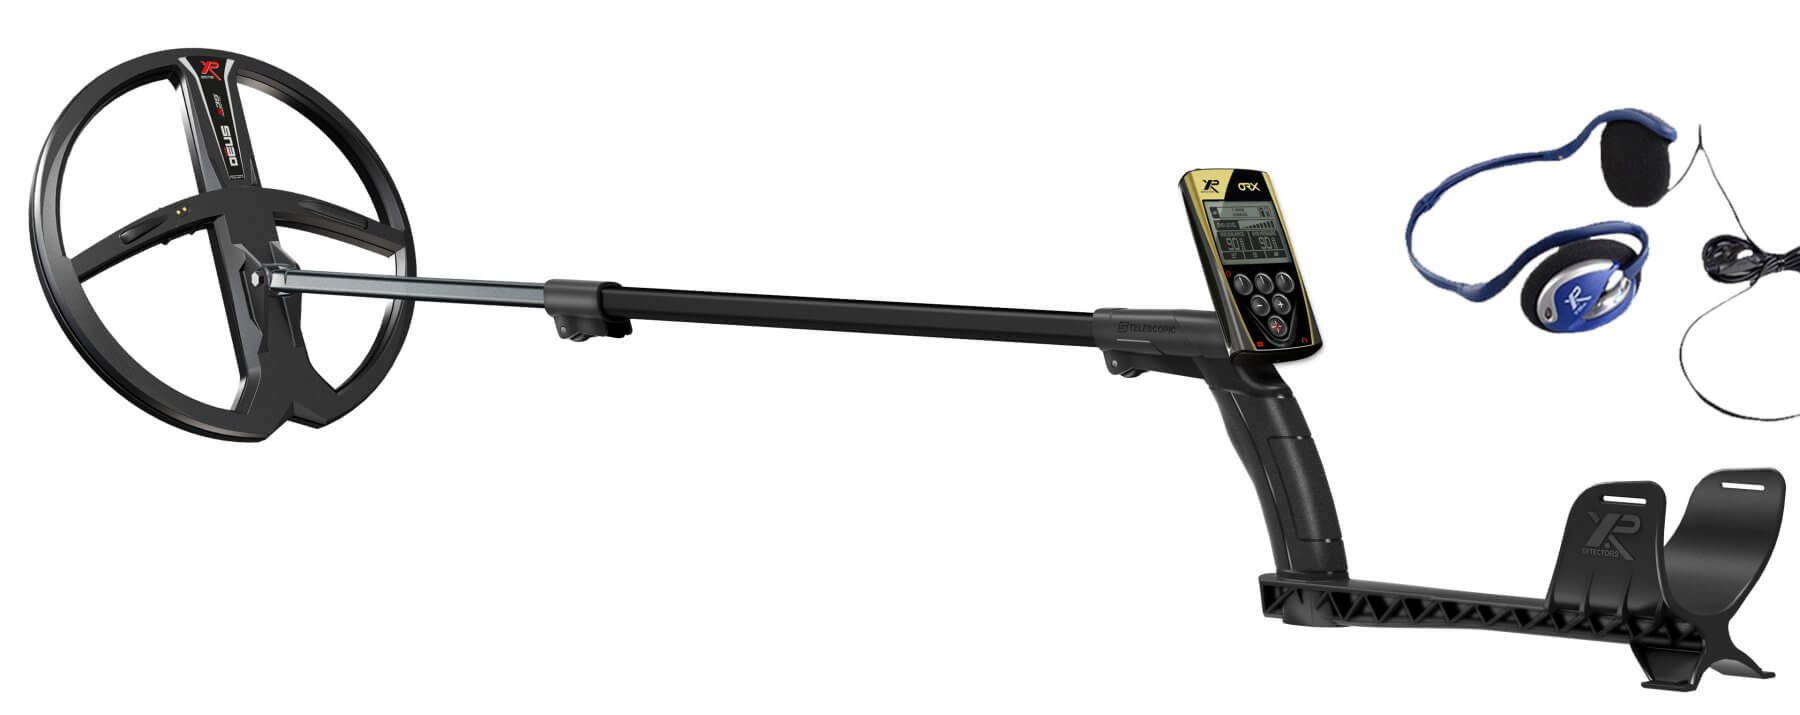 XP ORX Wireless Metal Detector with Back-lit Display + FX-02 Wired
    Backphone Headphones + 11